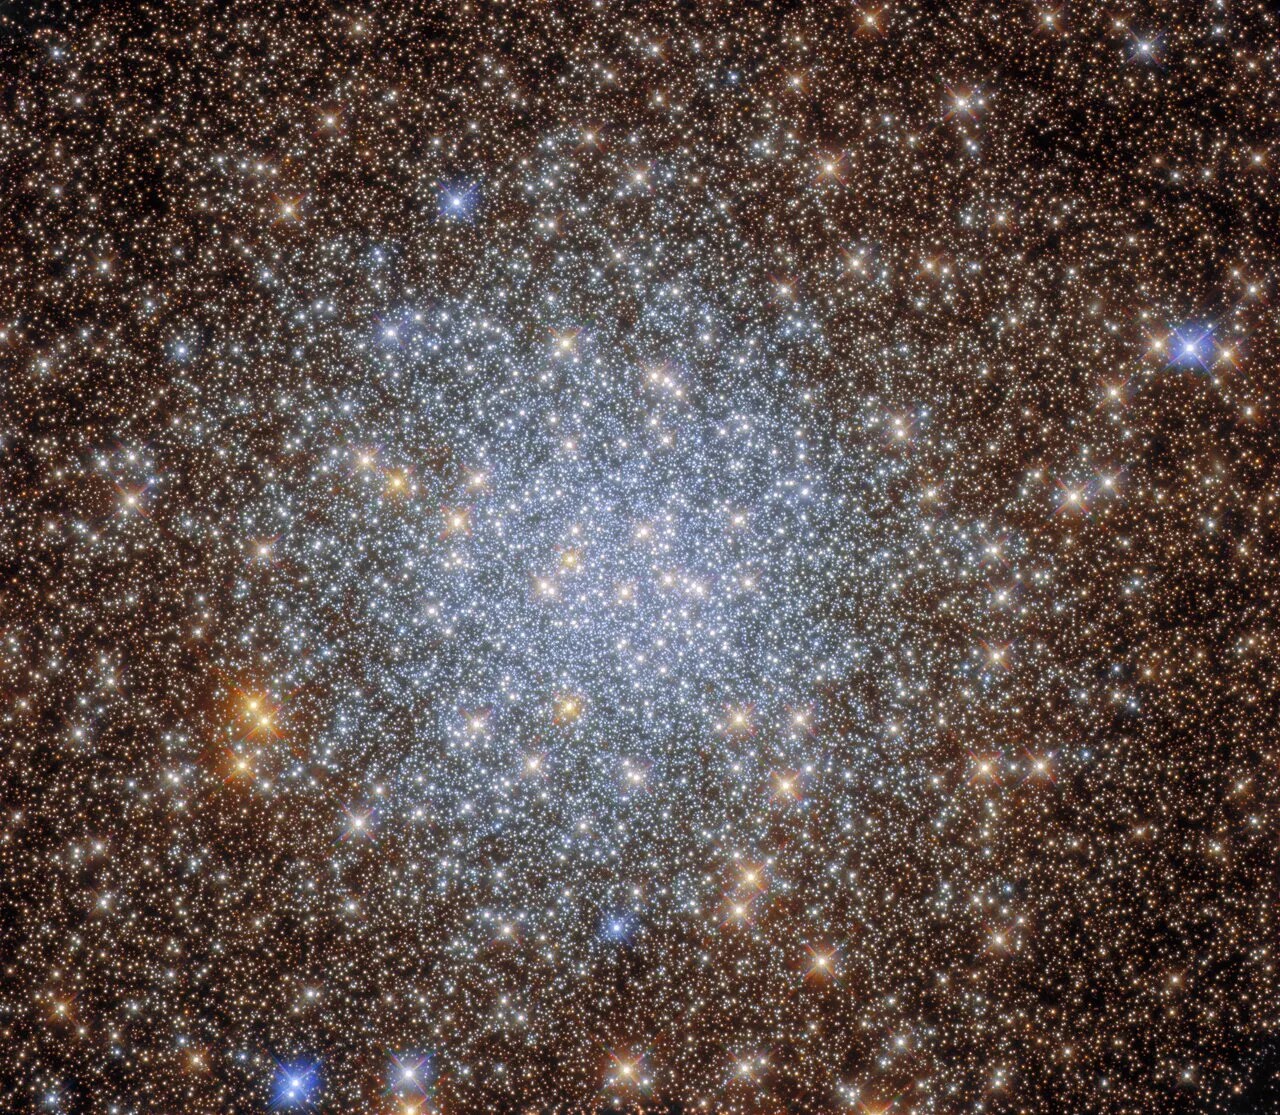 Stars fill the image; center holds sphere of densely packed, bright, blue-white stars; gold-colored stars, with a smattering of blue stars, surround the central sphere